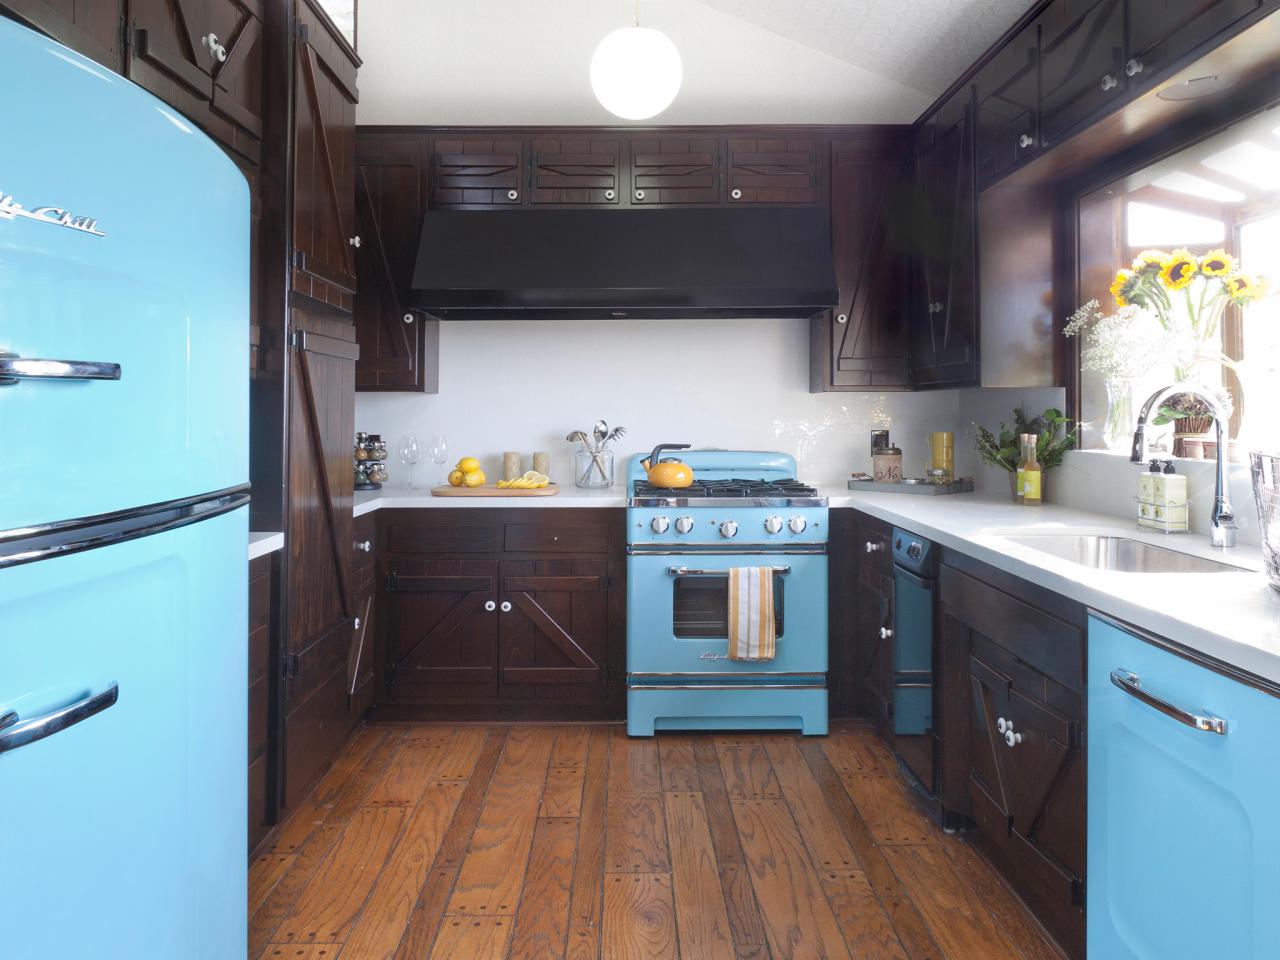 A kitchen with blue appliances and wood floors featuring kitchen cabinets.